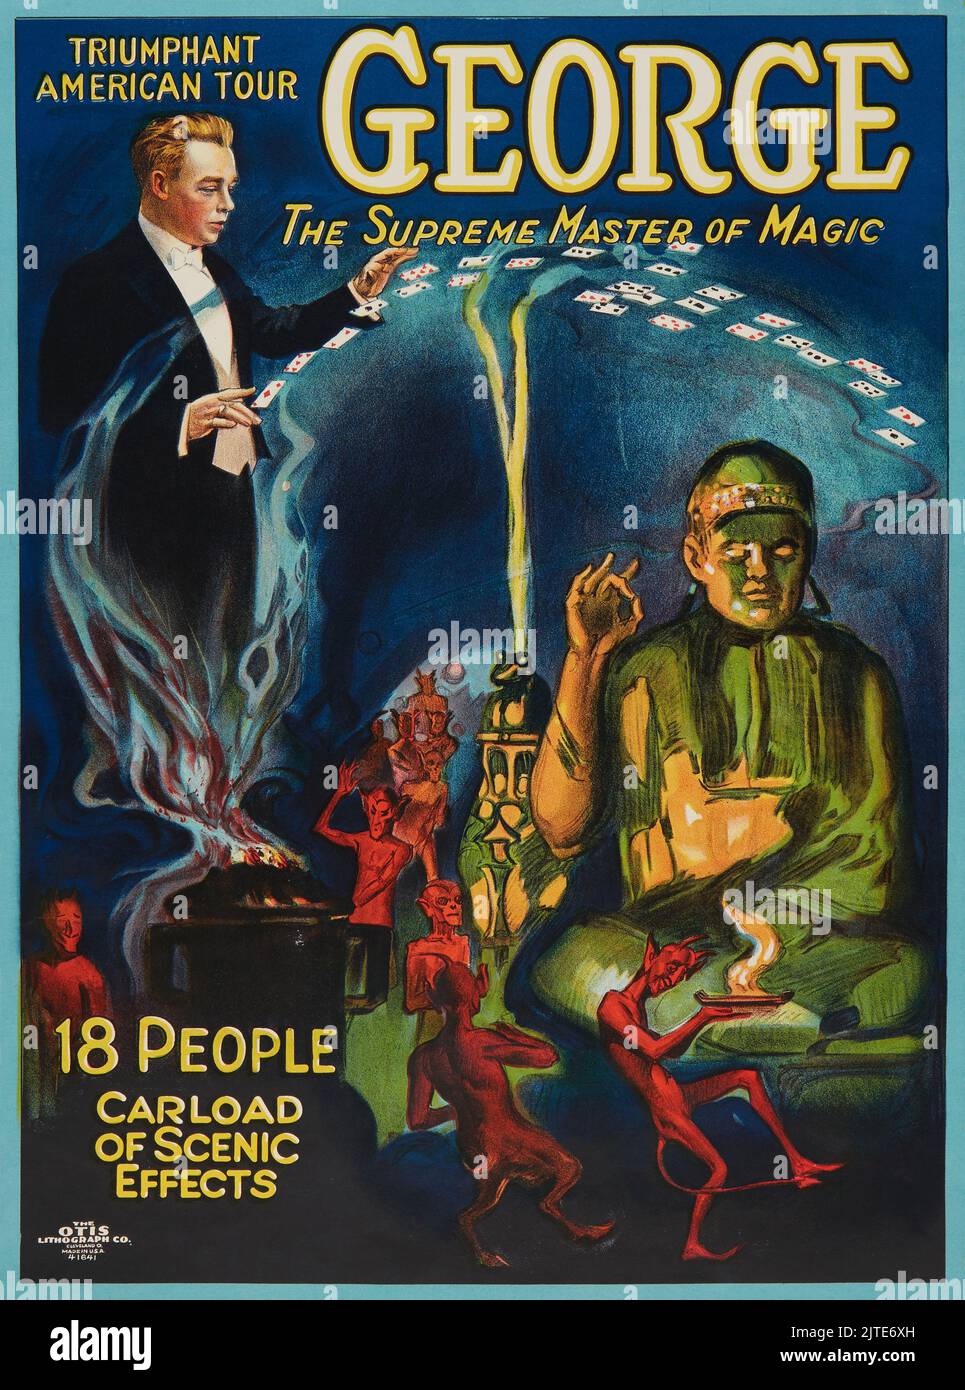 Vintage 1920s Magician Poster - George - Triumphant American tour. George the supreme master of magic. Stock Photo